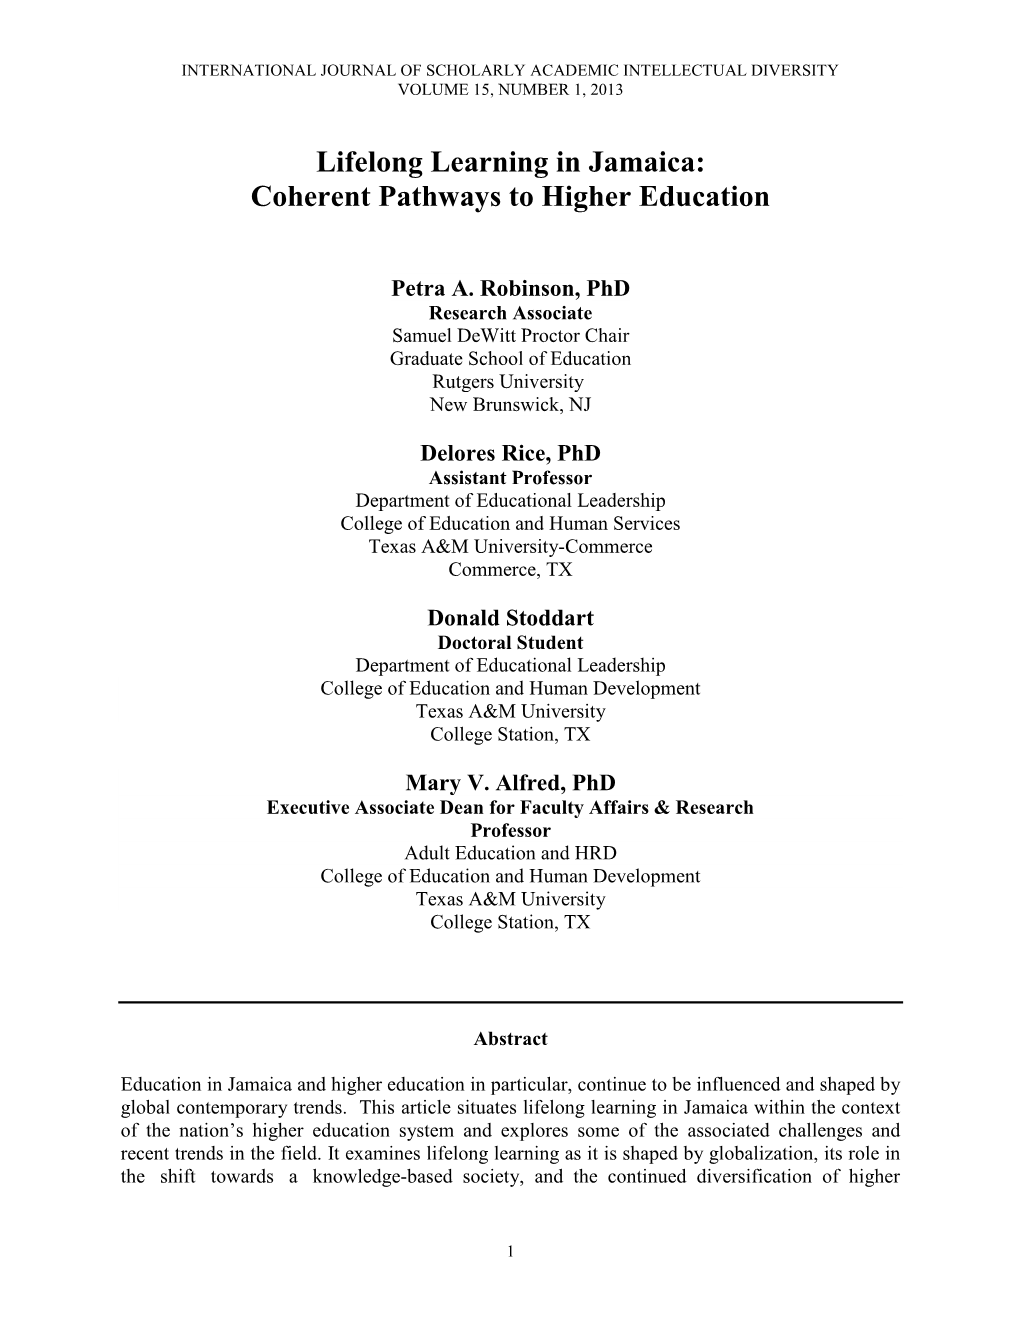 Lifelong Learning in Jamaica: Coherent Pathways to Higher Education